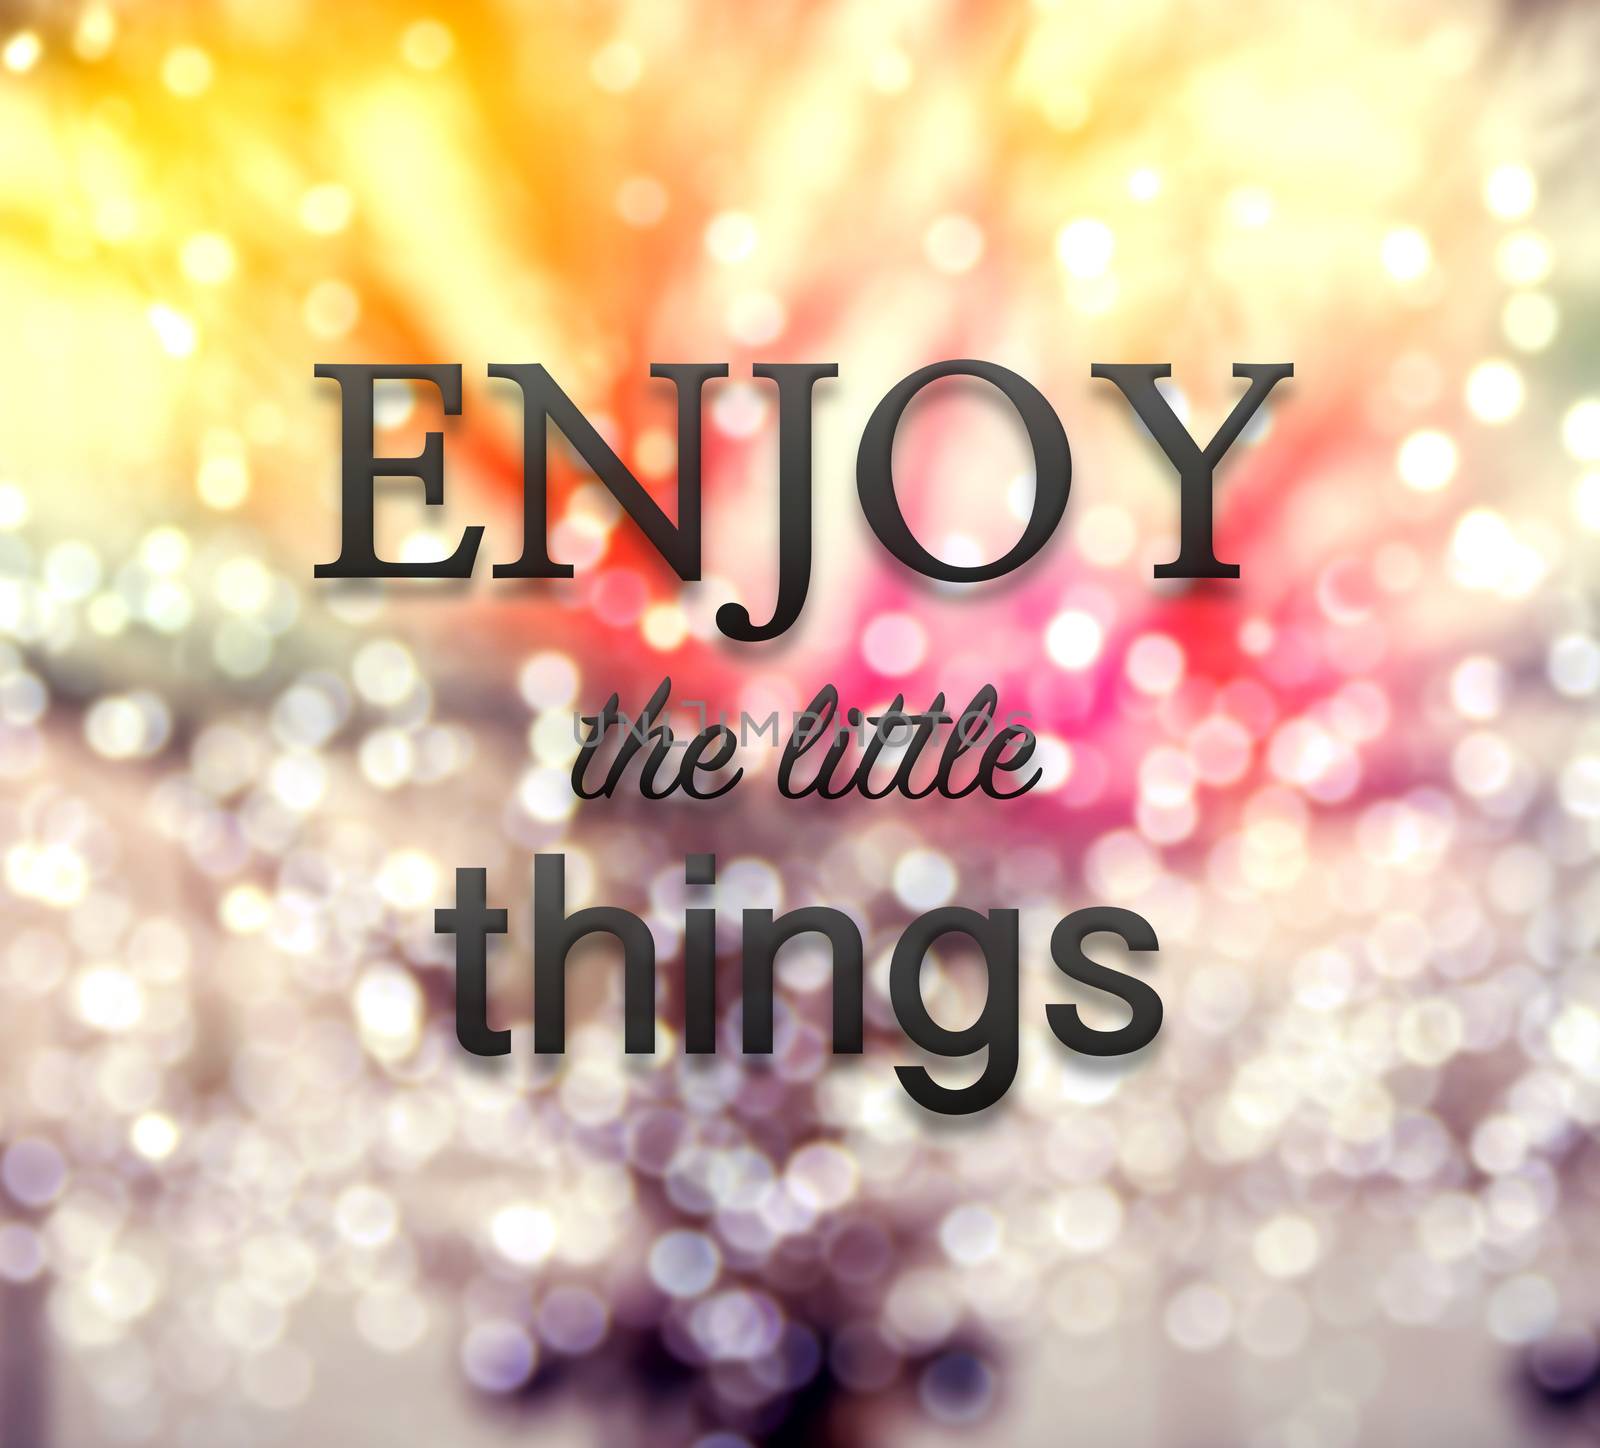 Enjoy the little things - black tone of inspirational typographic quote on abstract bokeh background,, vintage and retro style.